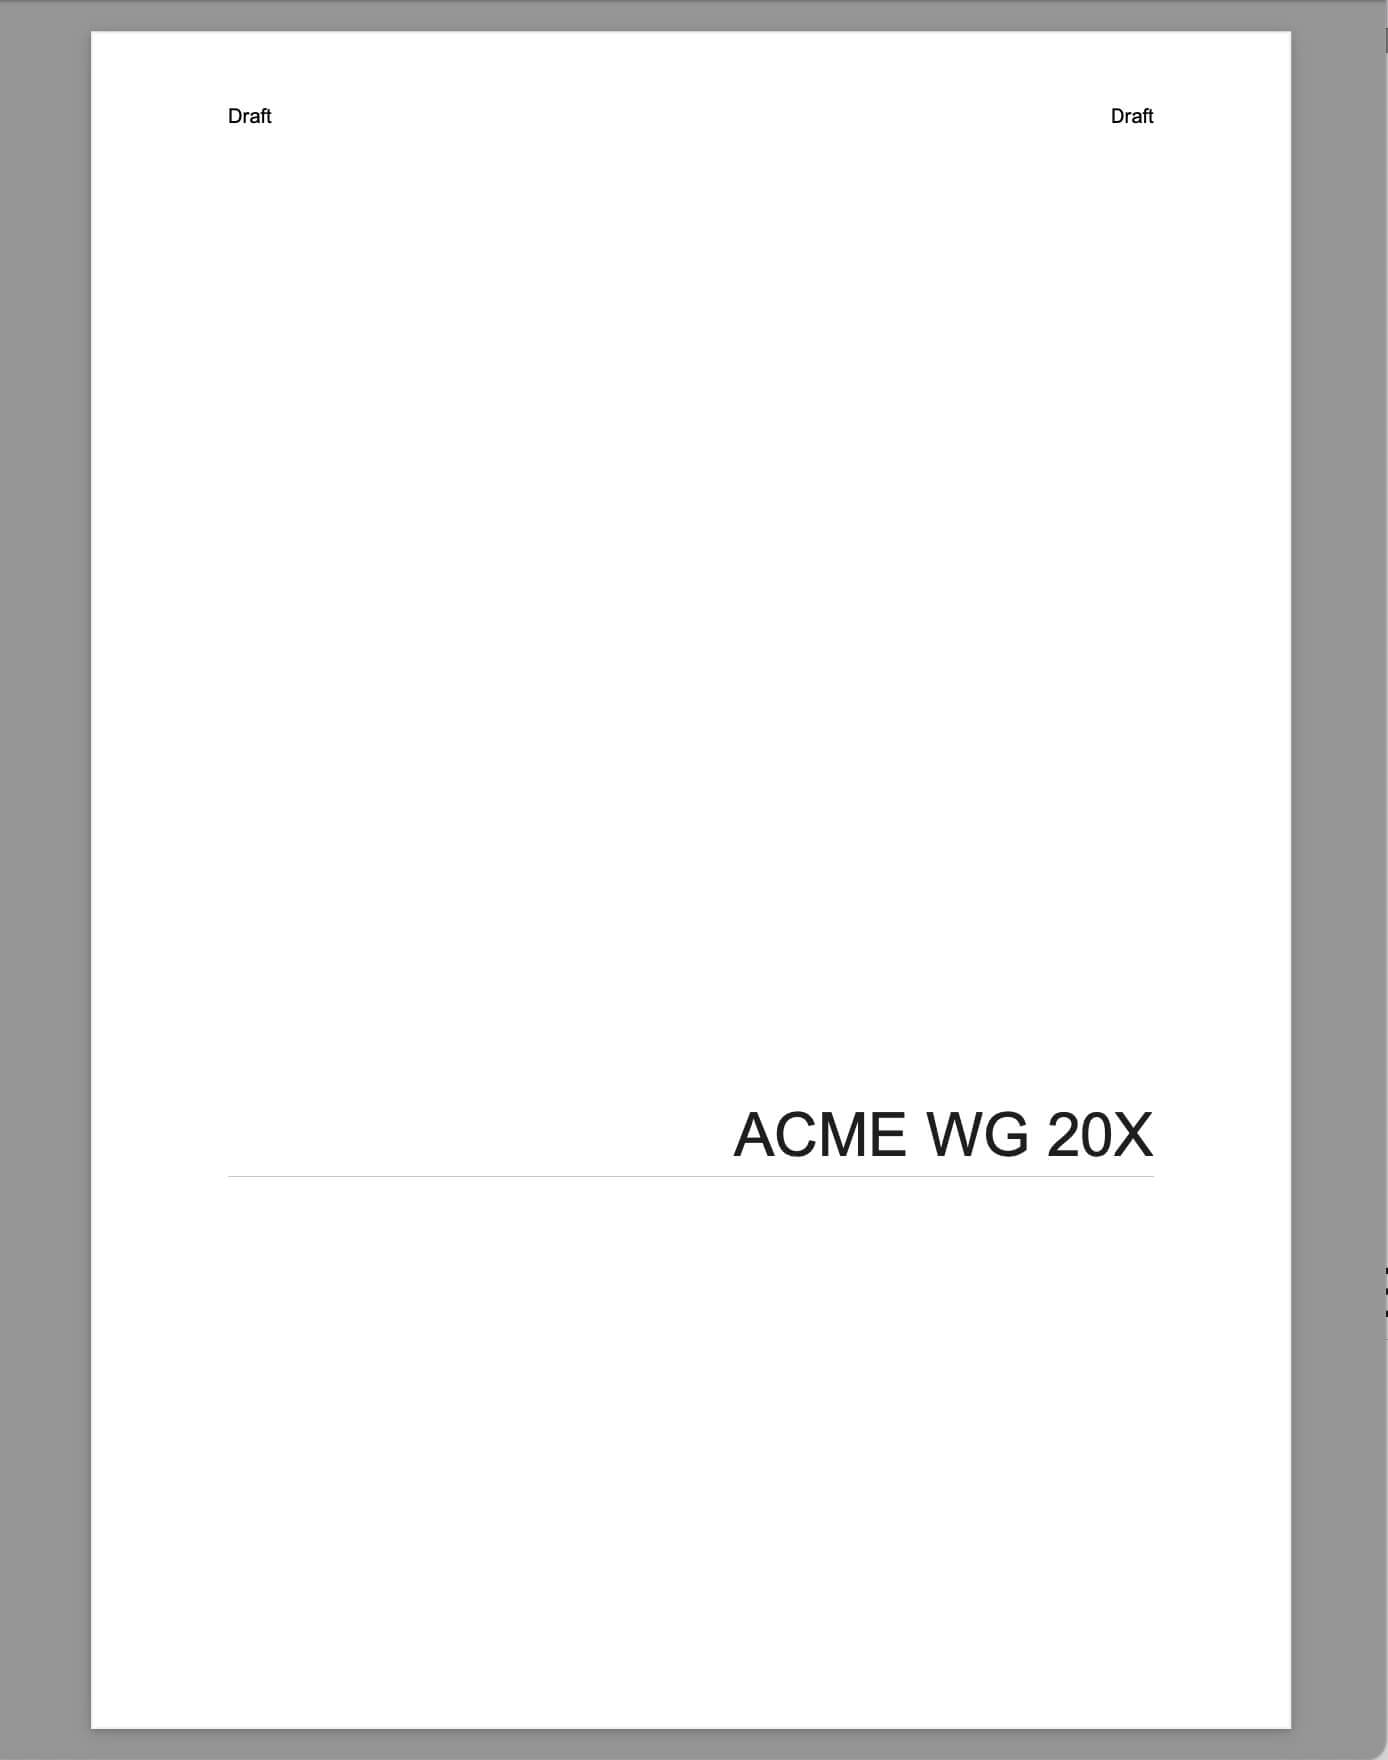 PDF cover page. It has the title of the publication. At the top, the word draft appears in the header on the left and right sides of the page.